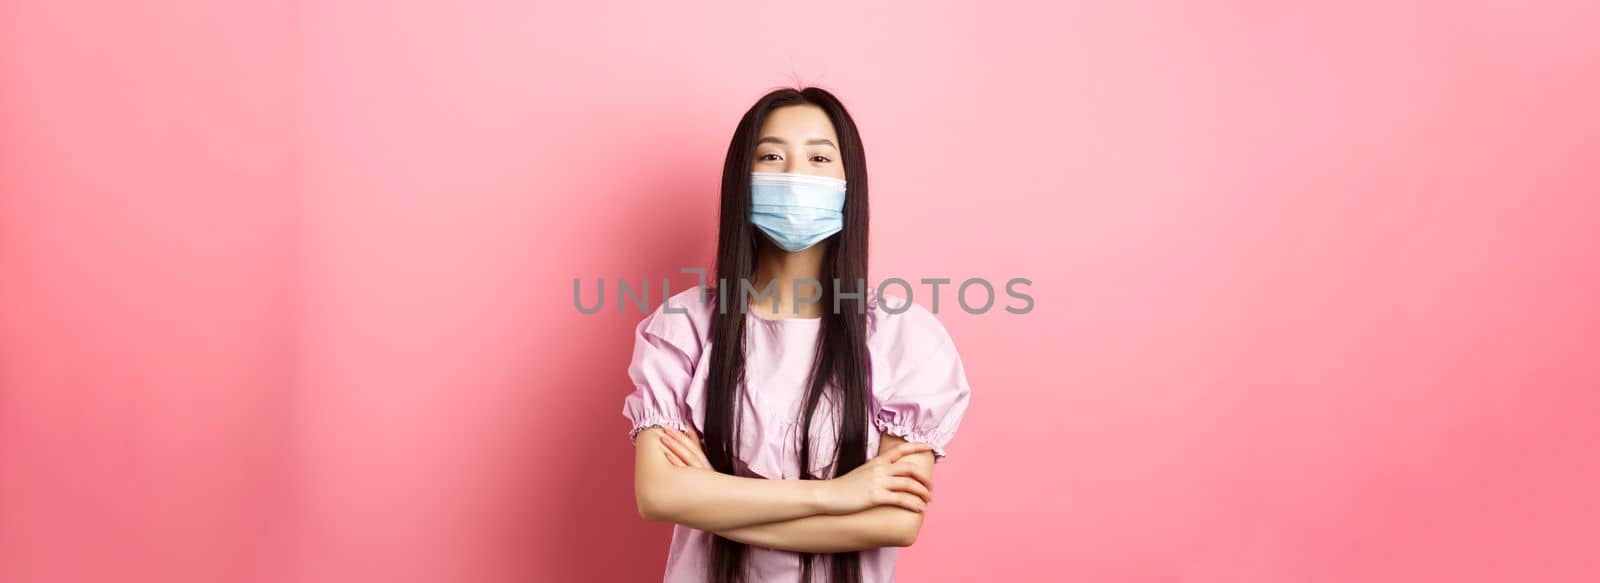 Covid-19, pandemic lifestyle concept. Cute asian woman in medical mask looking confident, cross arms on chest in self-assured pose, standing against pink background.